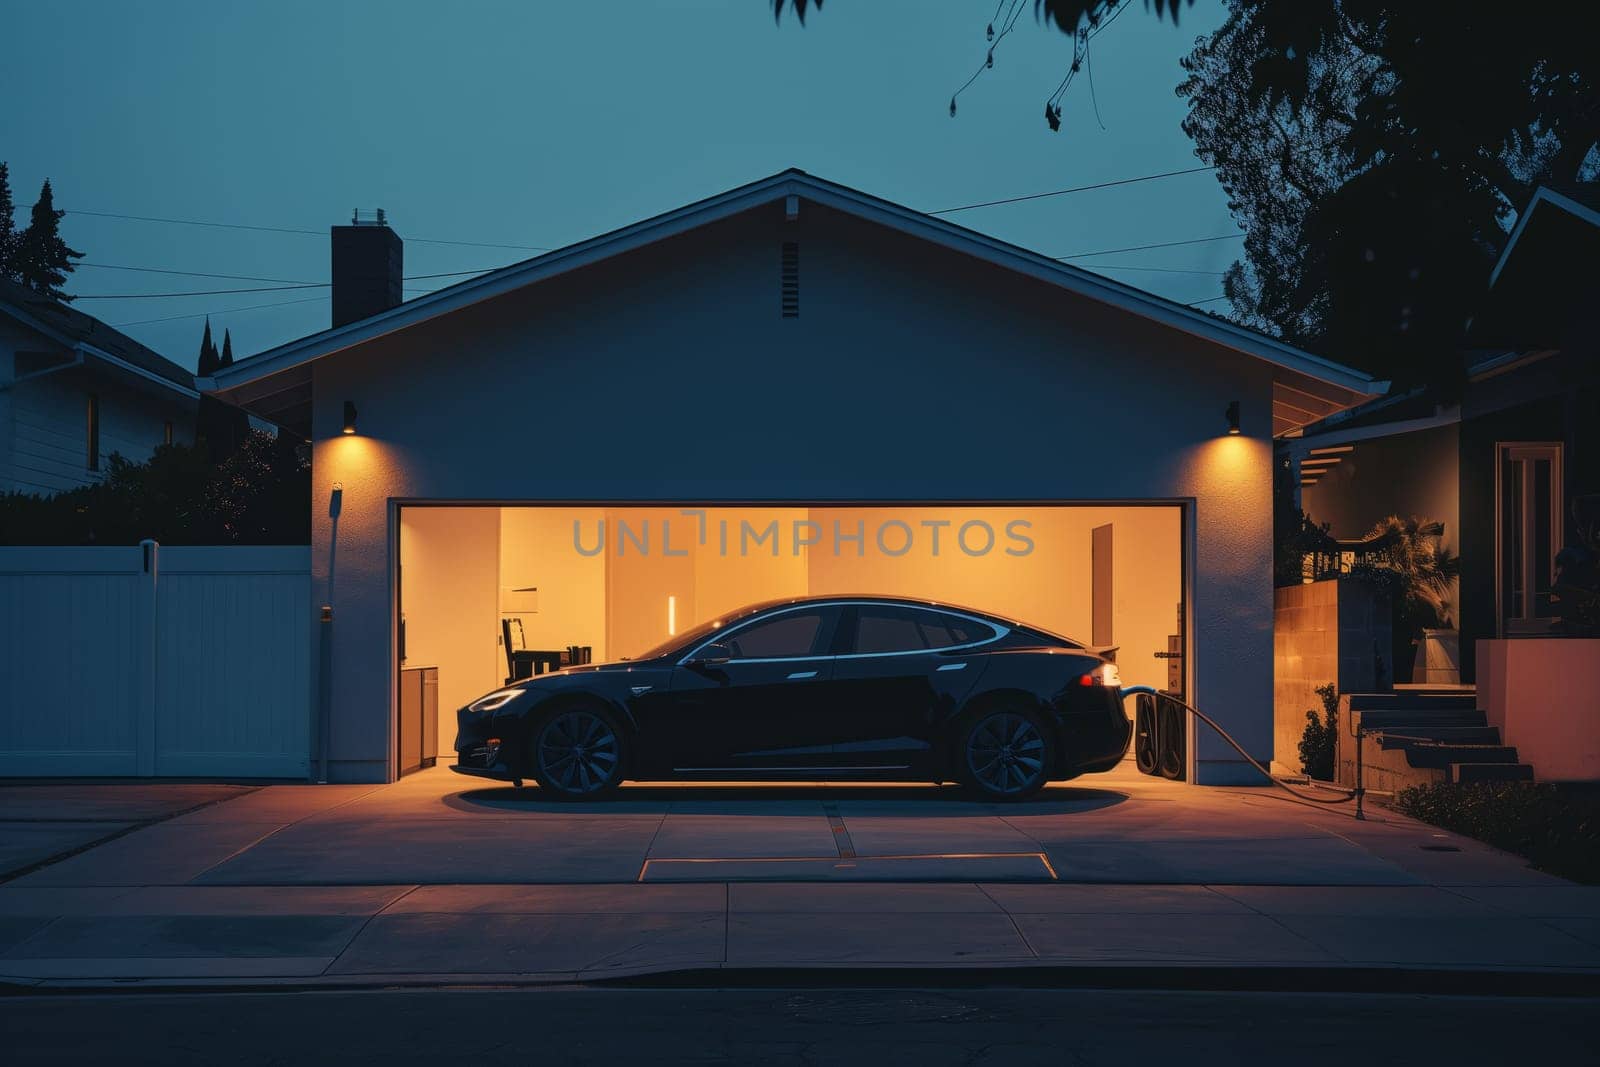 At night, a car is parked in a garage of a building with automotive lighting, under a sky filled with stars. The asphalt driveway leads to the garage door beside a tree